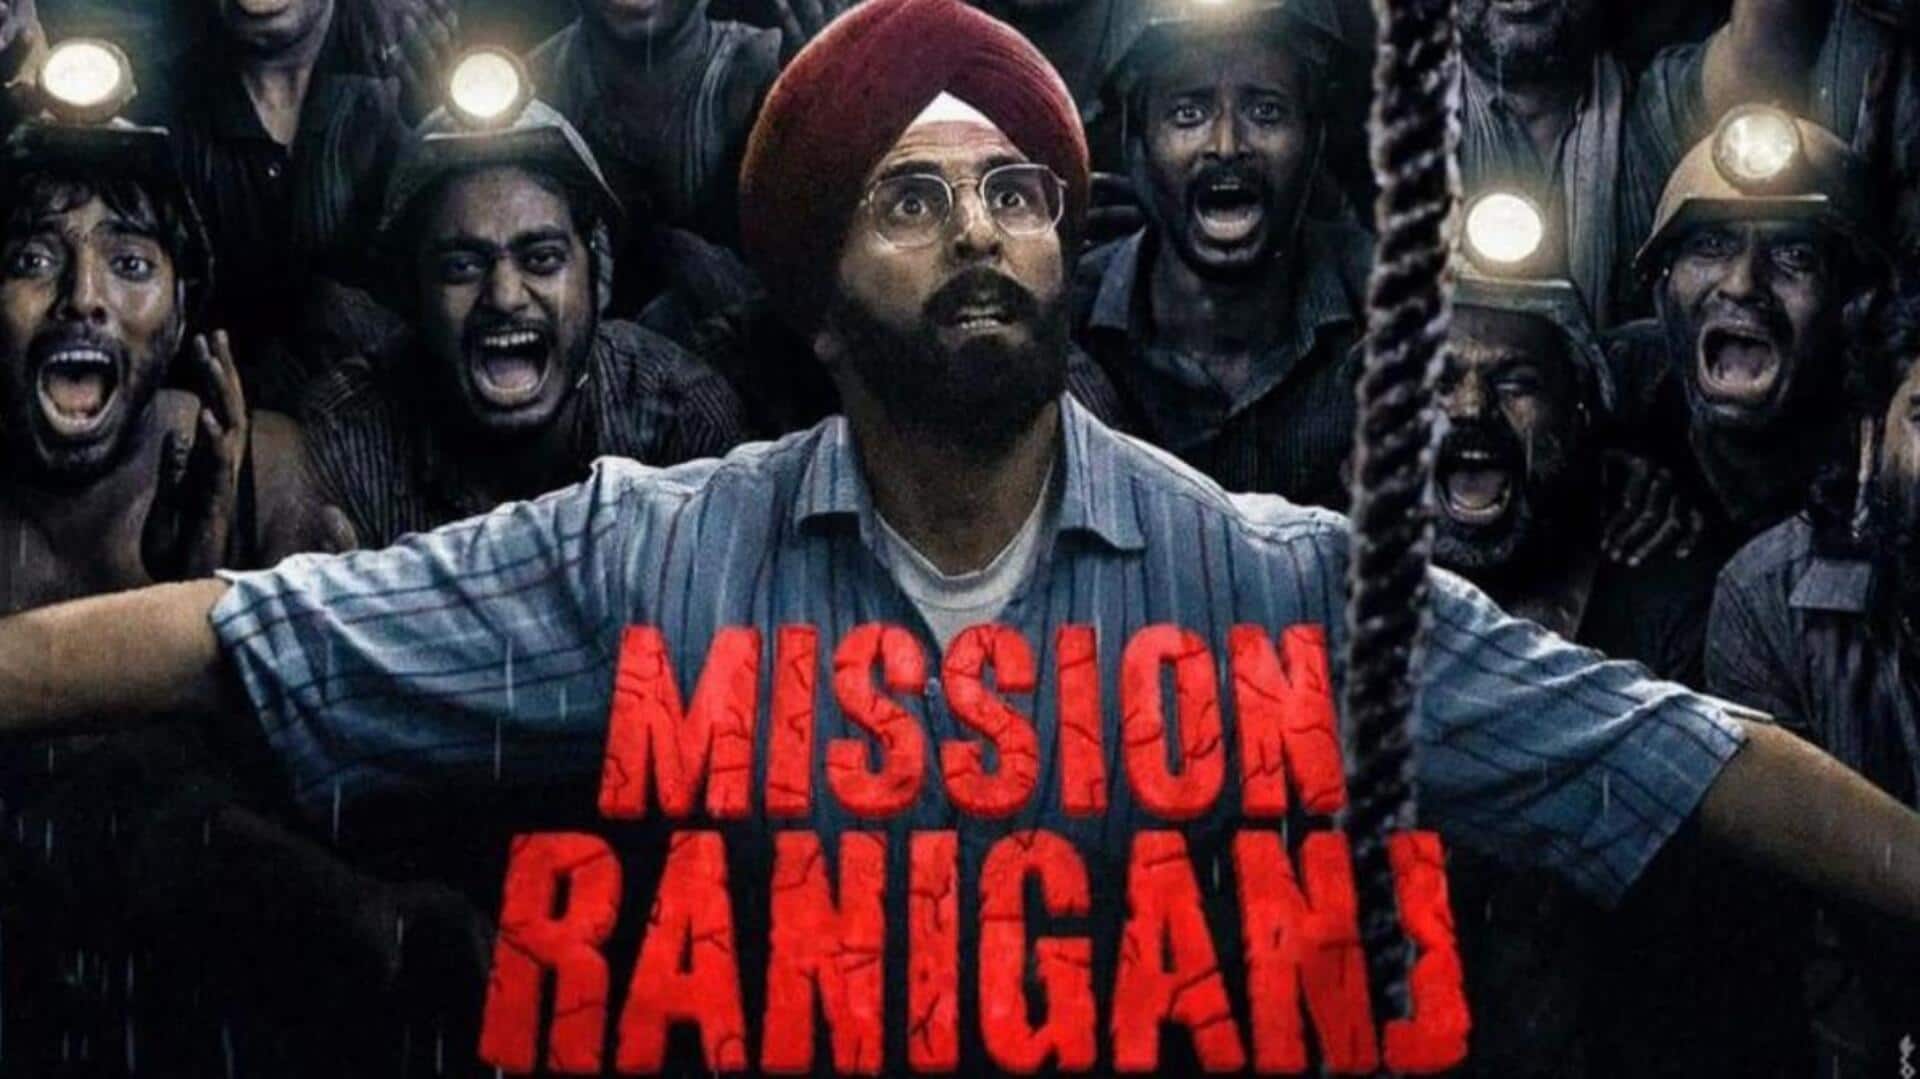 Box office collection: 'Mission Raniganj' gains much-needed momentum